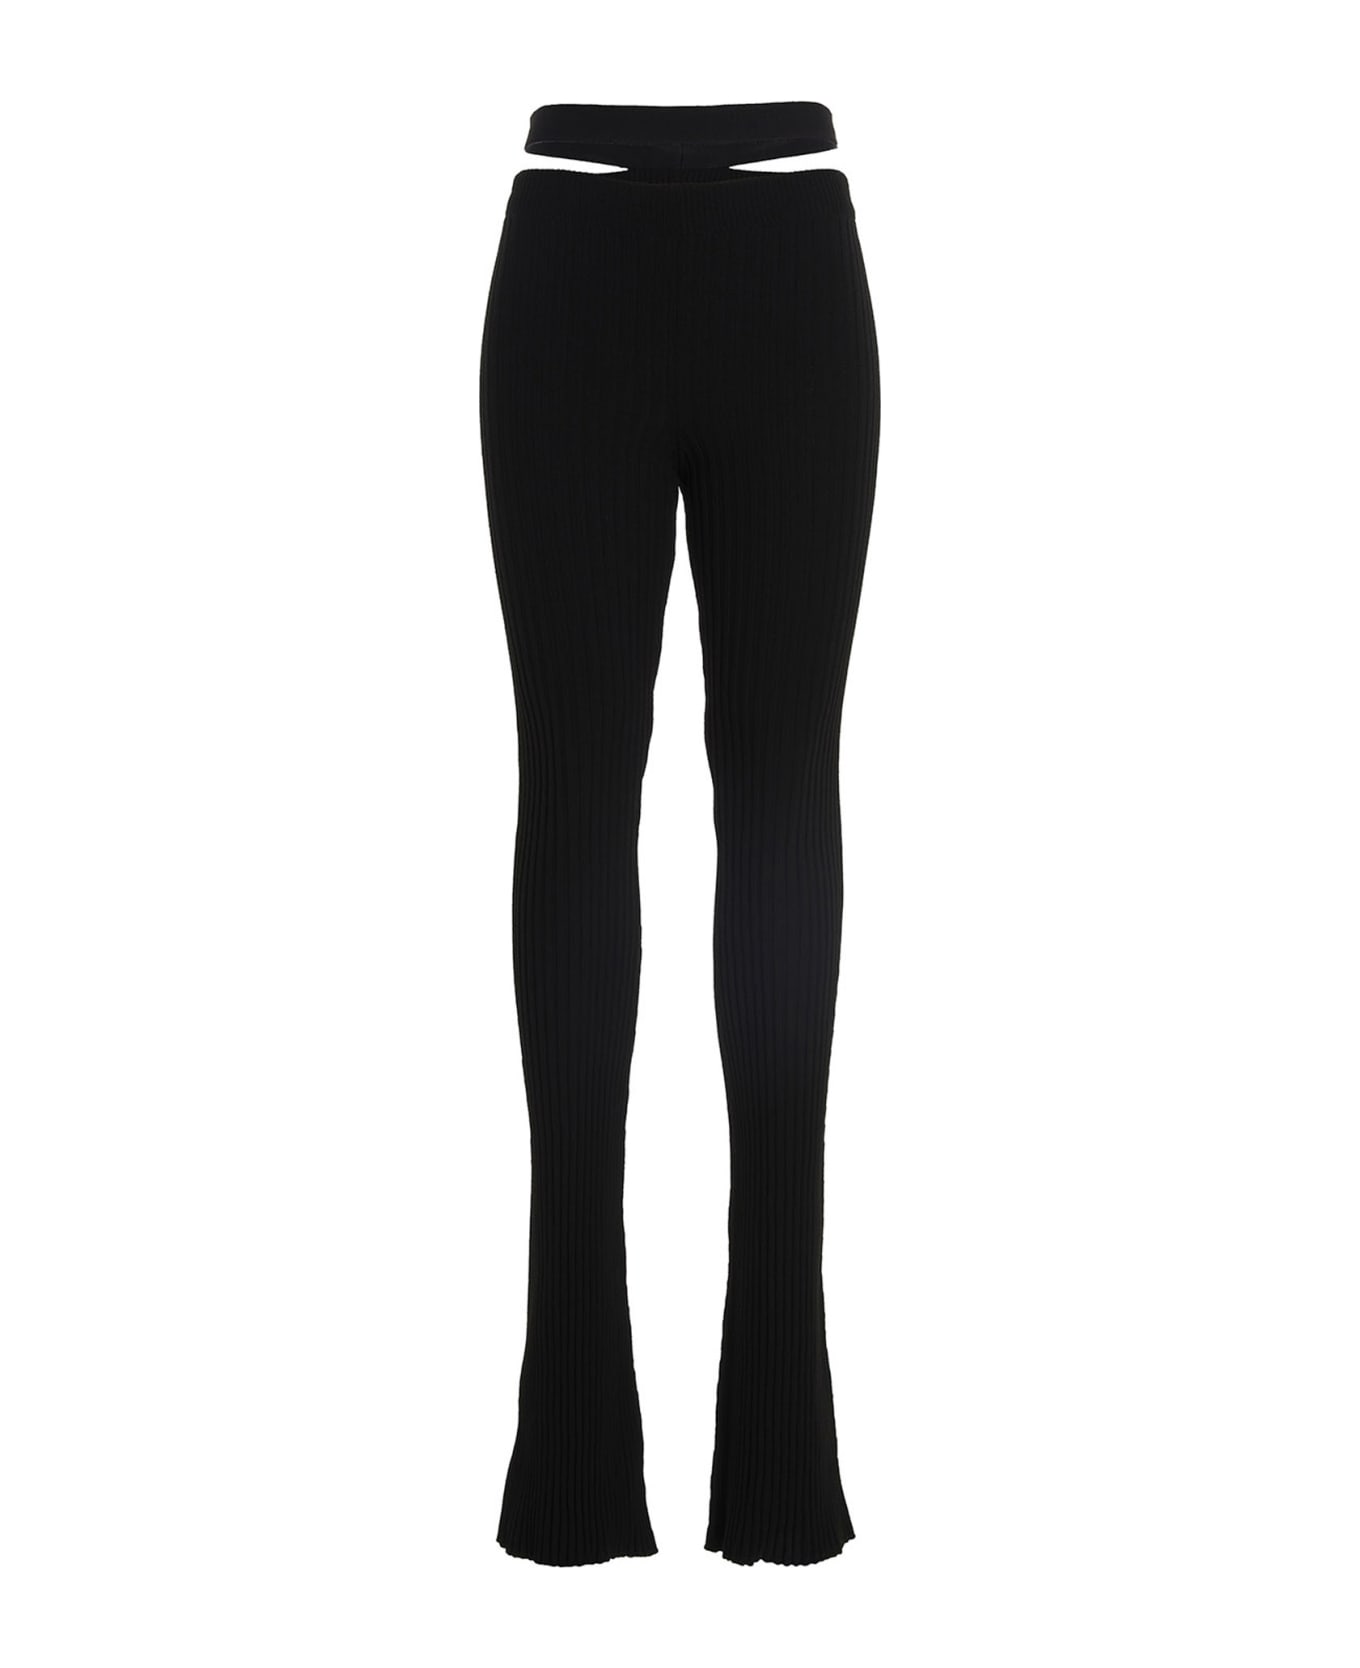 ANDREĀDAMO Ribbed Flared Trousers - Black  